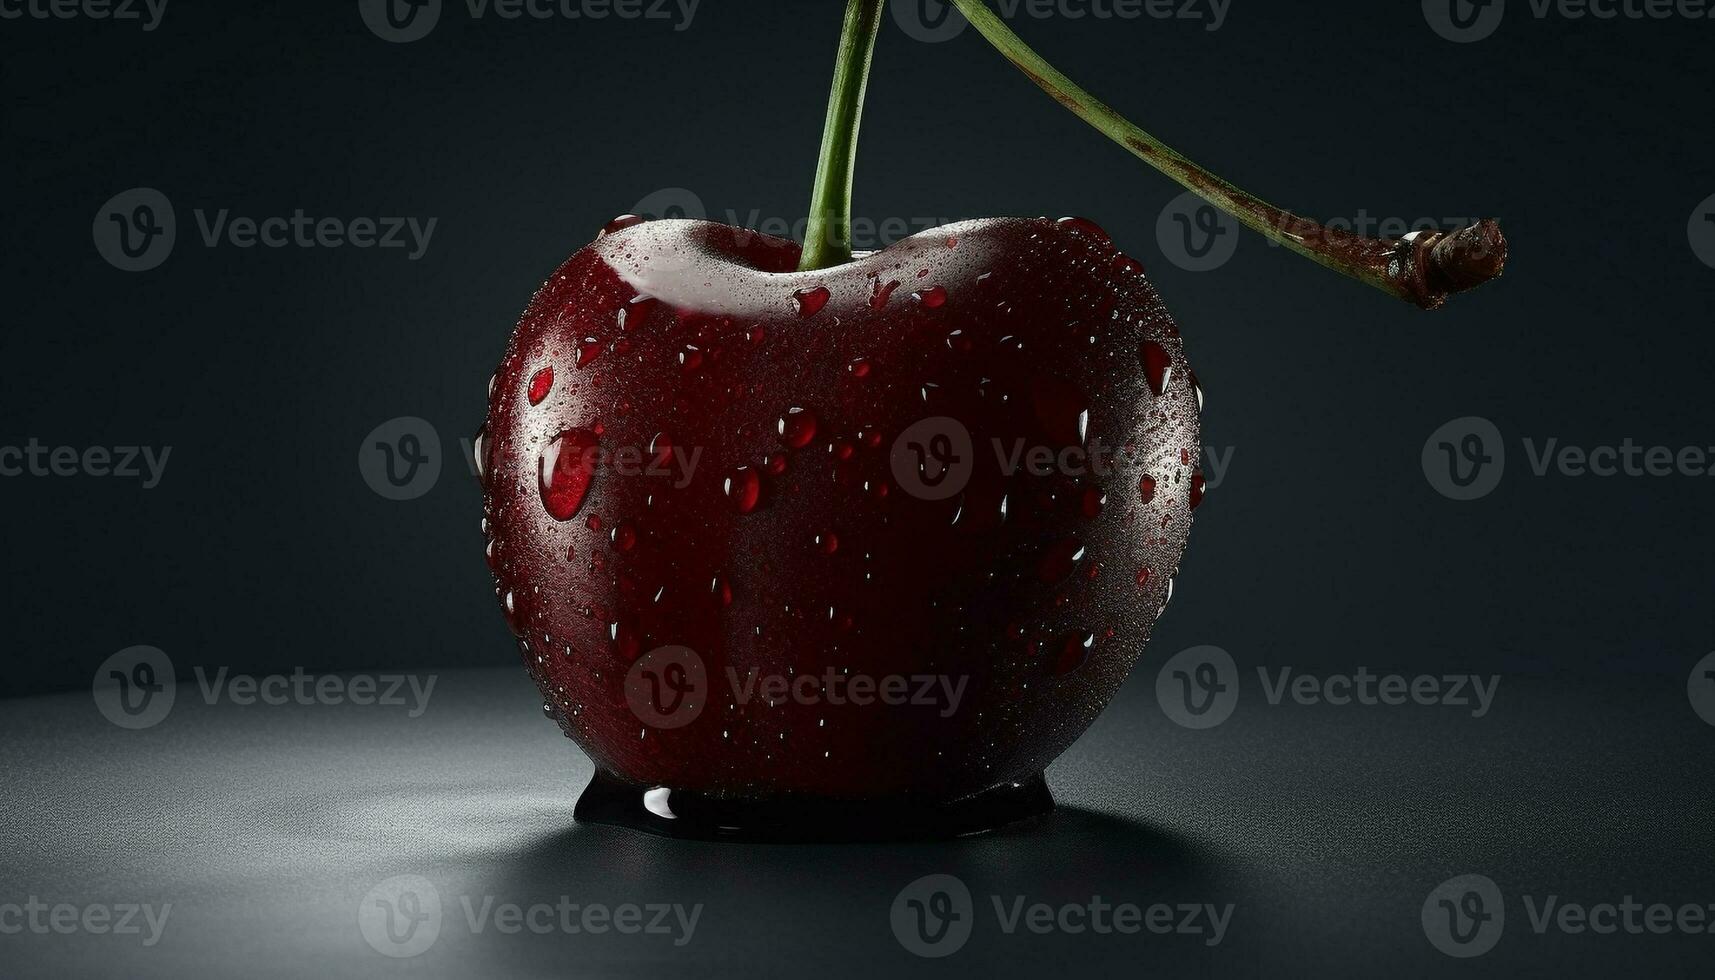 Juicy, ripe berry fruit on a clean, green table generated by AI photo